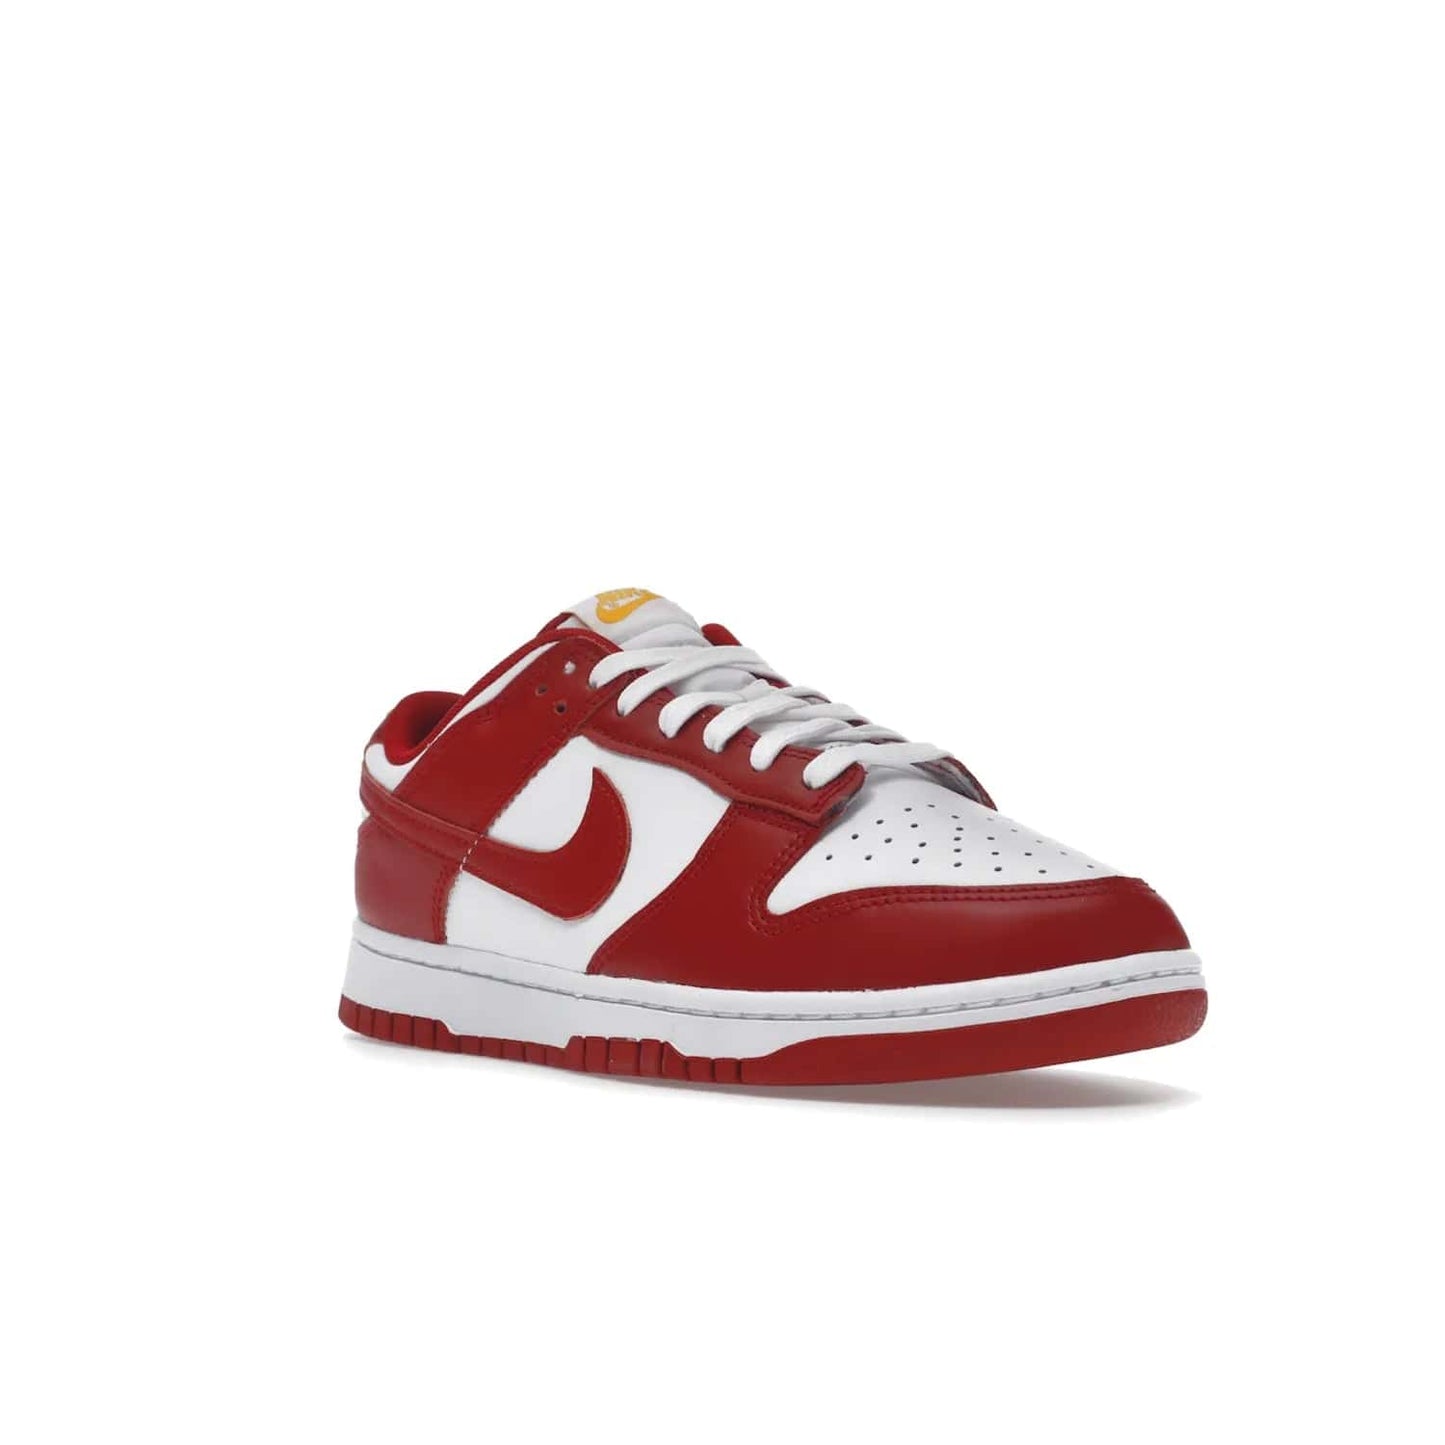 Nike Dunk Low USC - Image 6 - Only at www.BallersClubKickz.com - The Nike Dunk Low USC DD1391-602 colorway captures the eye of University of Southern California fans. Crafted with leather and rubber upper and outsole, this stylish sneaker features a white, gym red, and yellow colorway. With yellow Nike branding, white perforated vamp, and red suede Swoosh, this sneaker turns heads. Get the classic Nike Dunk Low USC releasing on November 9th, 2022.